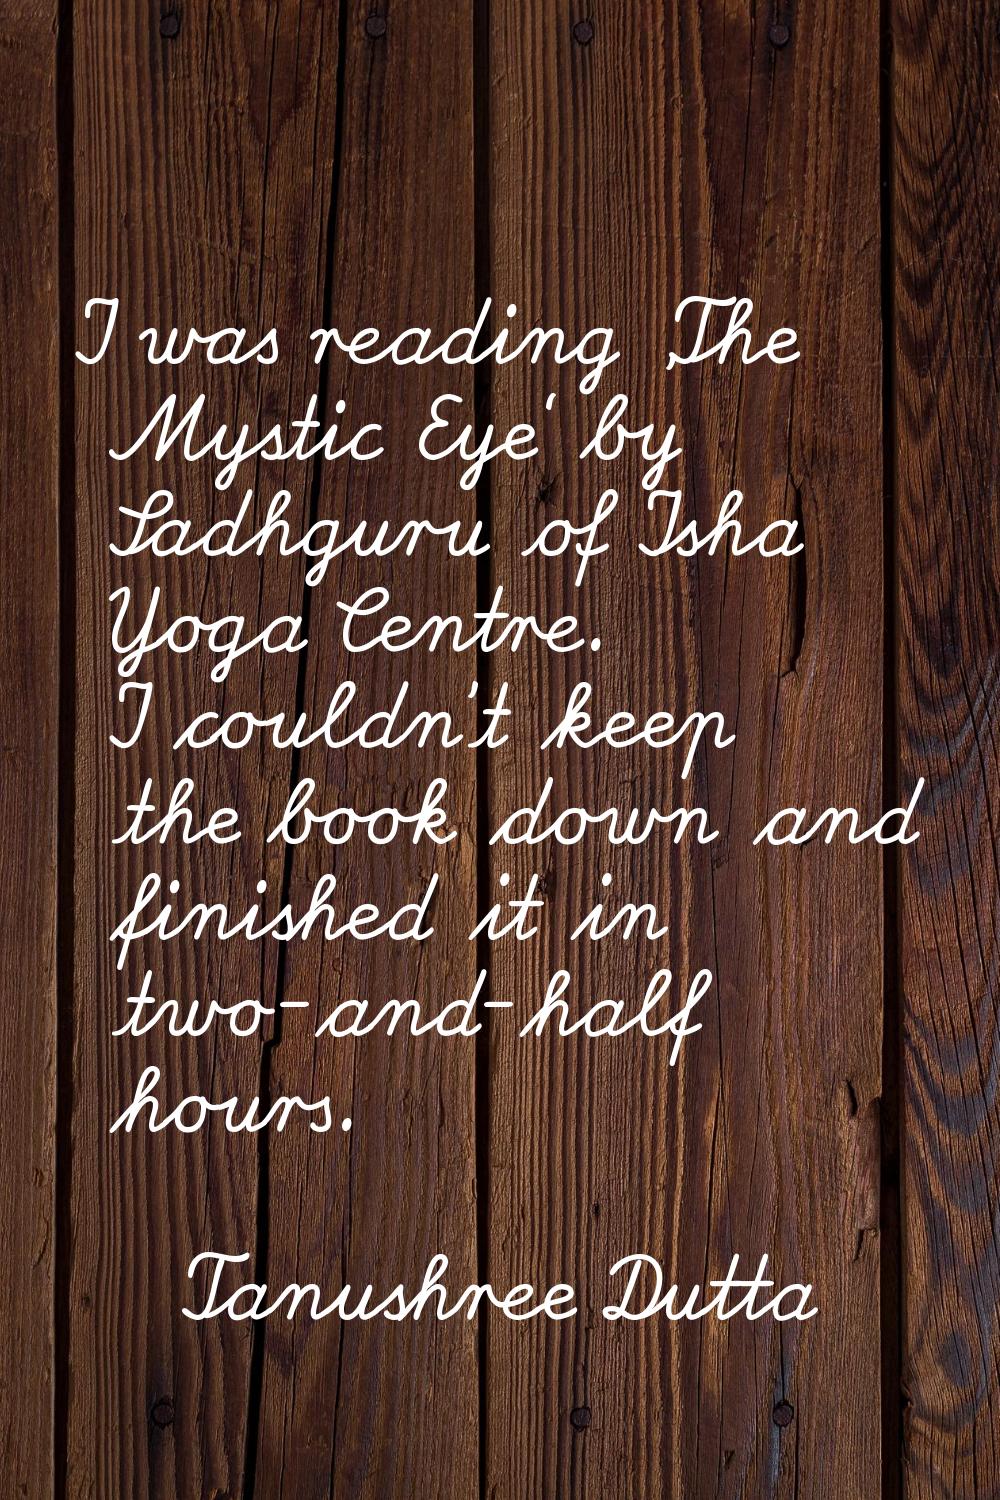 I was reading 'The Mystic Eye' by Sadhguru of Isha Yoga Centre. I couldn't keep the book down and f